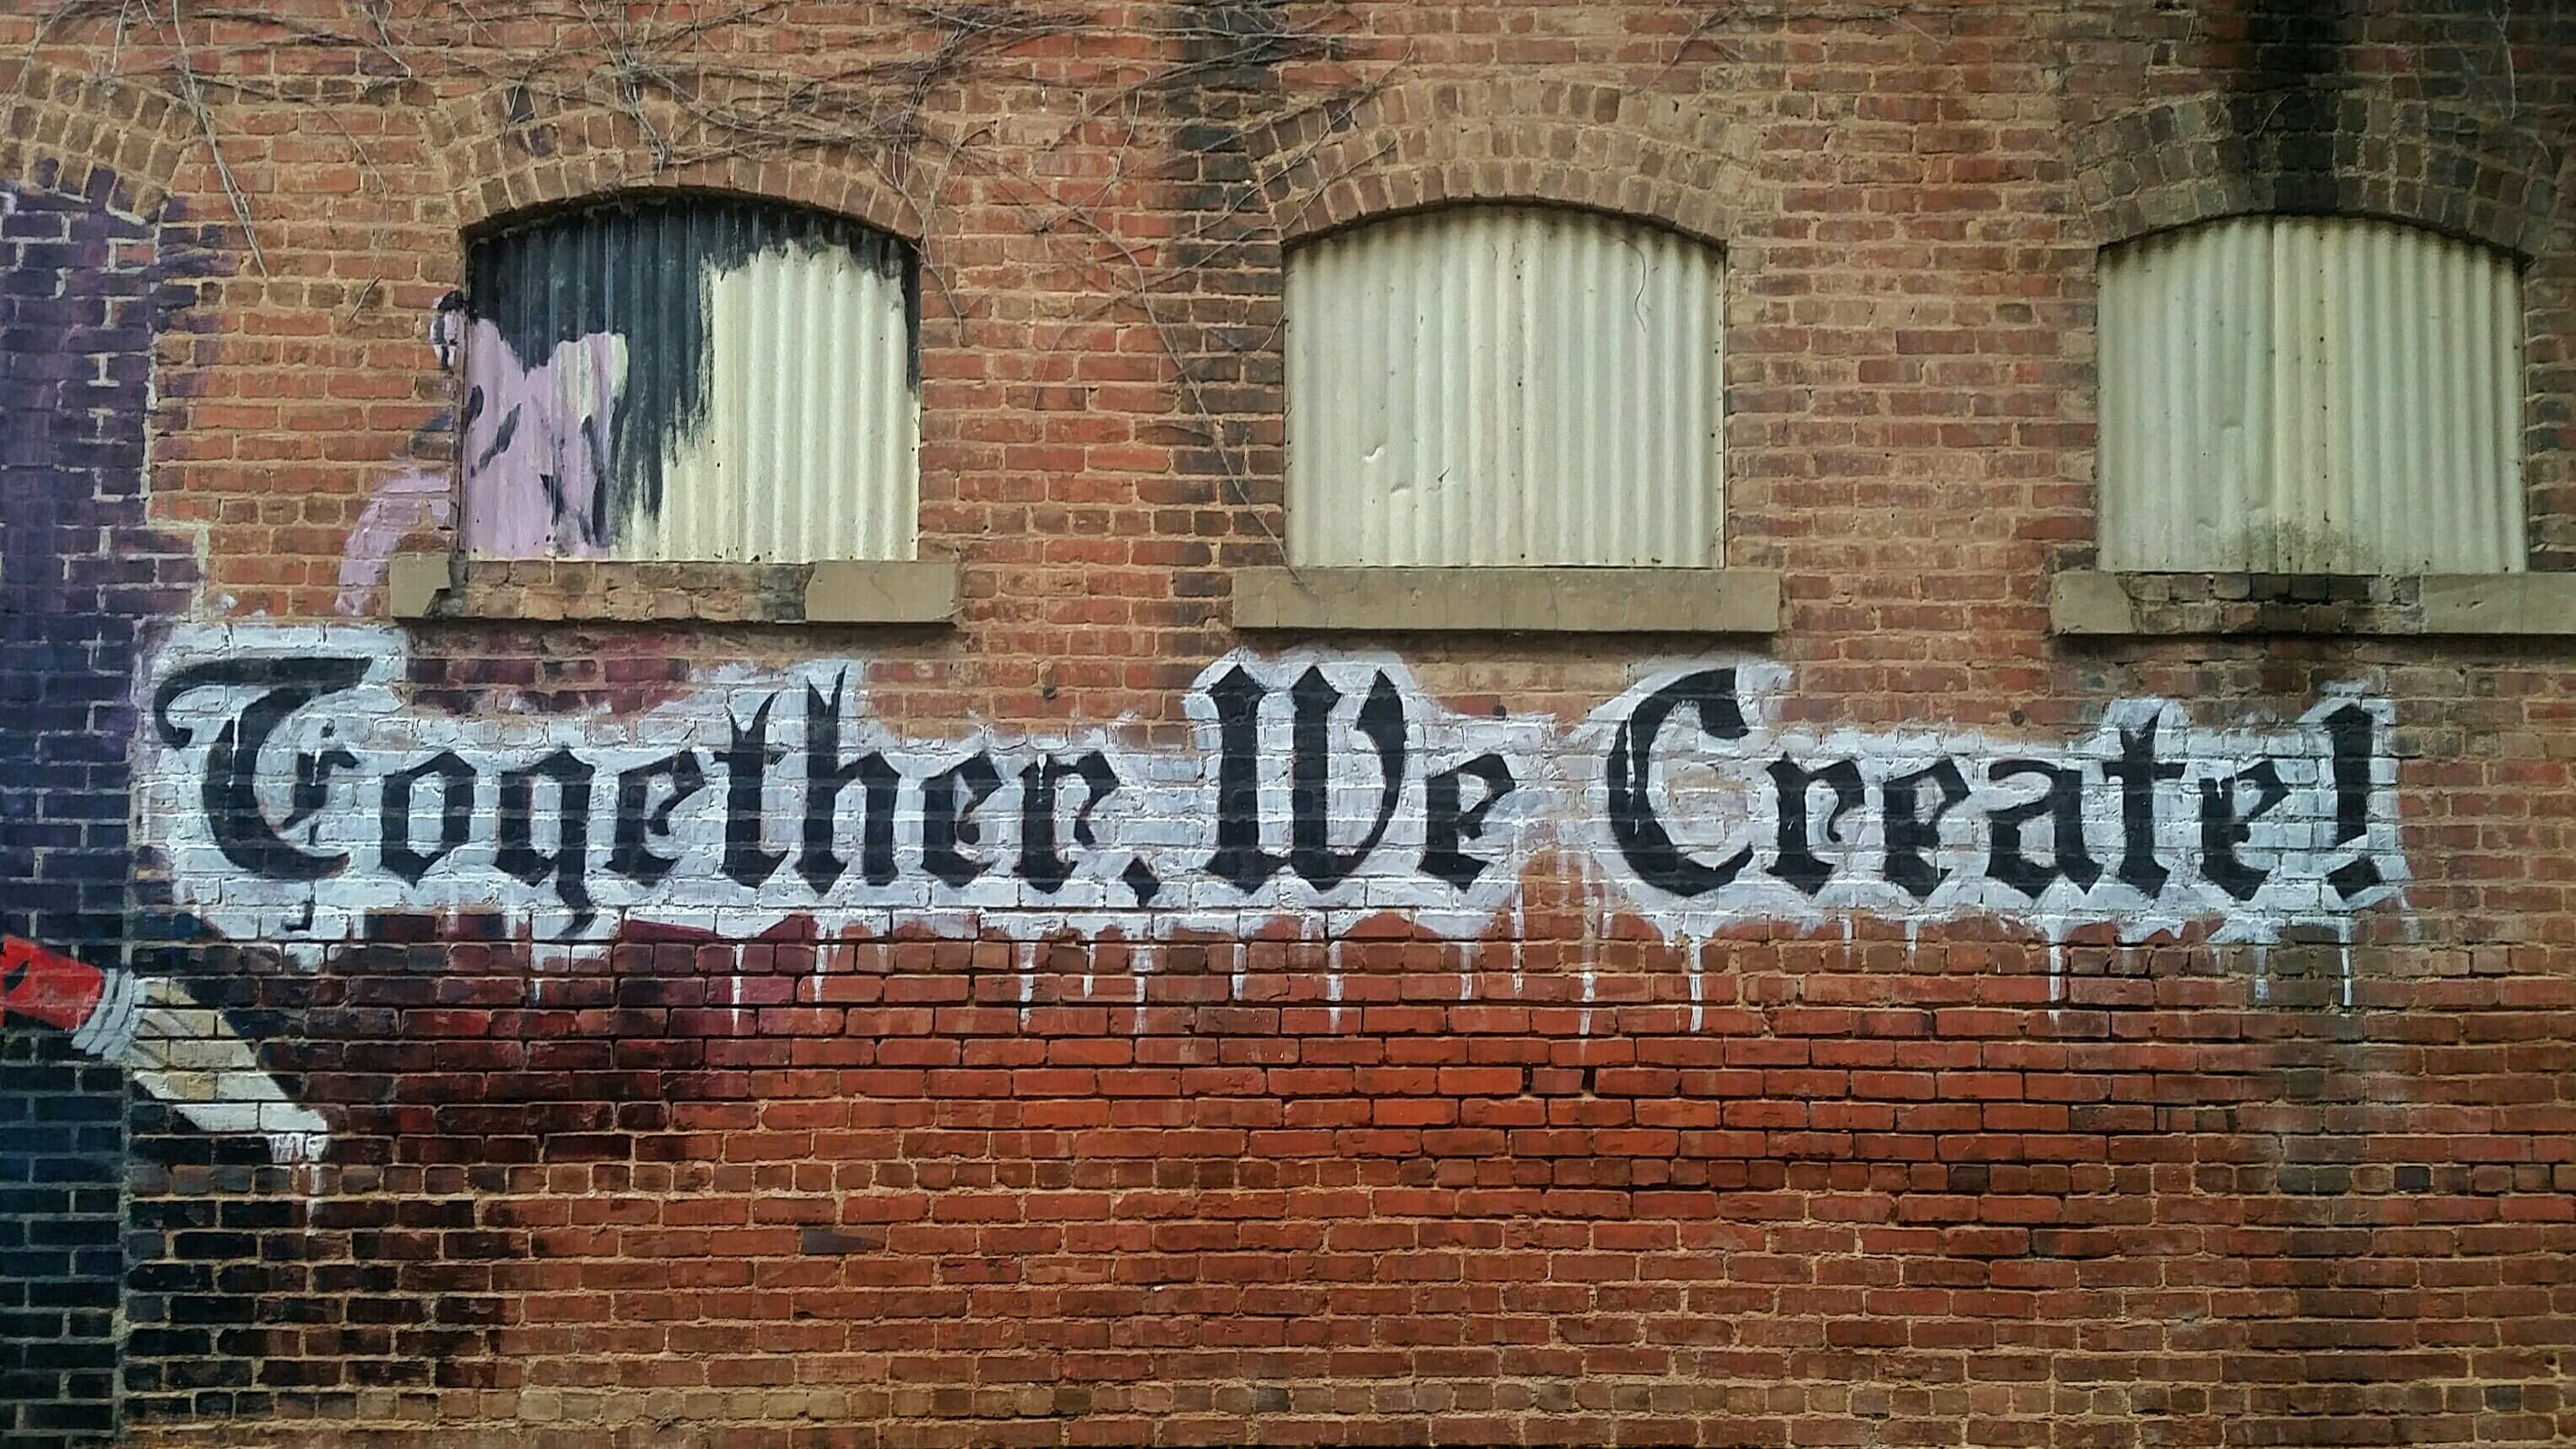 brick wall with together we create painted on it